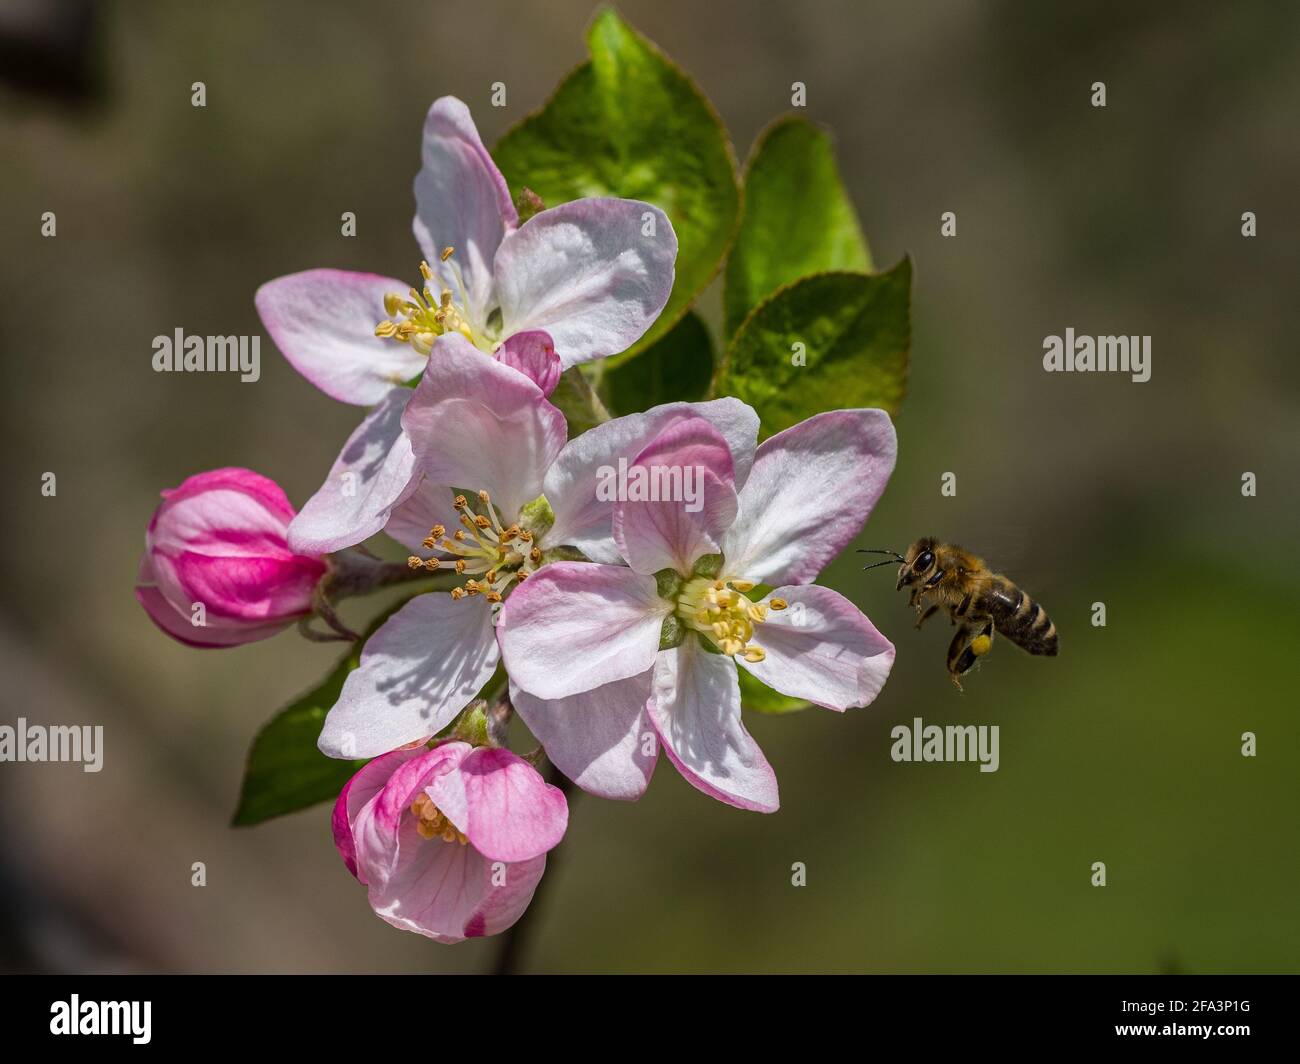 Closeup with apple tree flowers during spring. Stock Photo